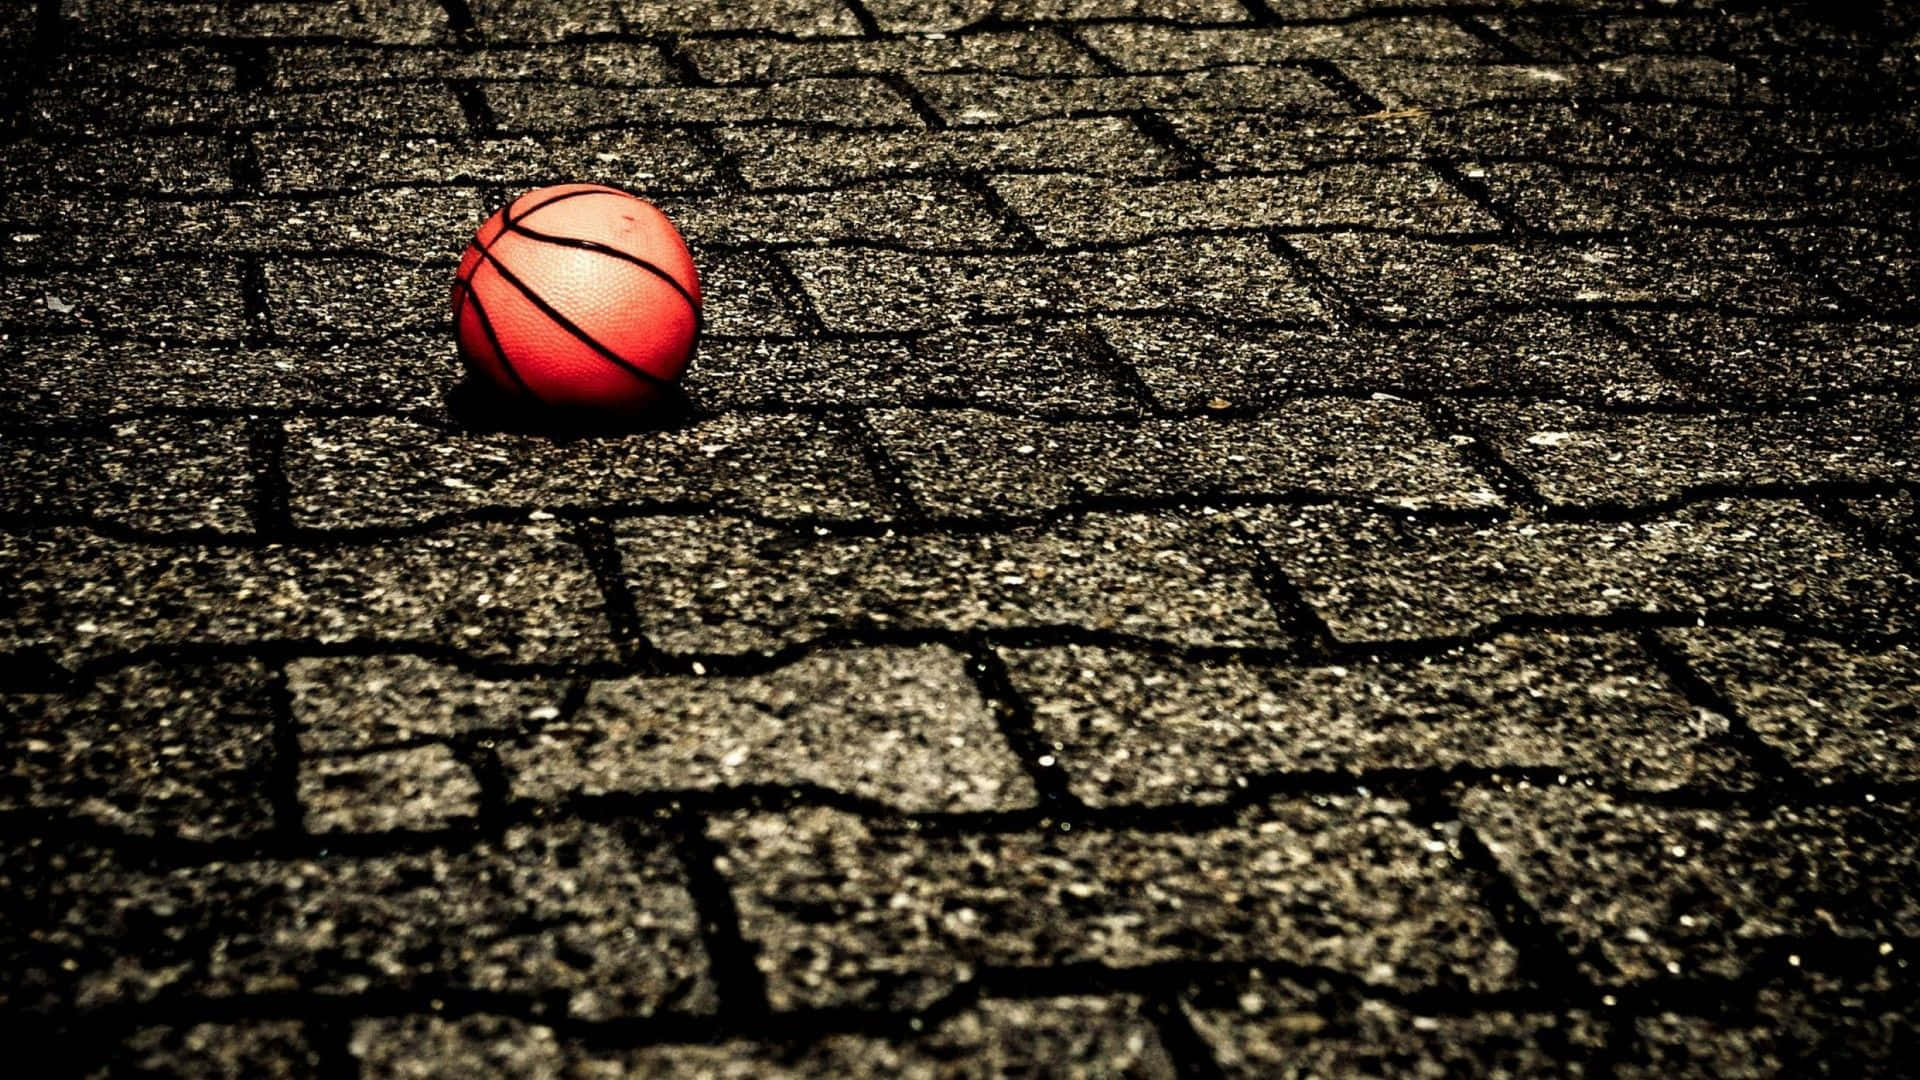 Score a Slam Dunk with This Basketball Themed Wallpaper